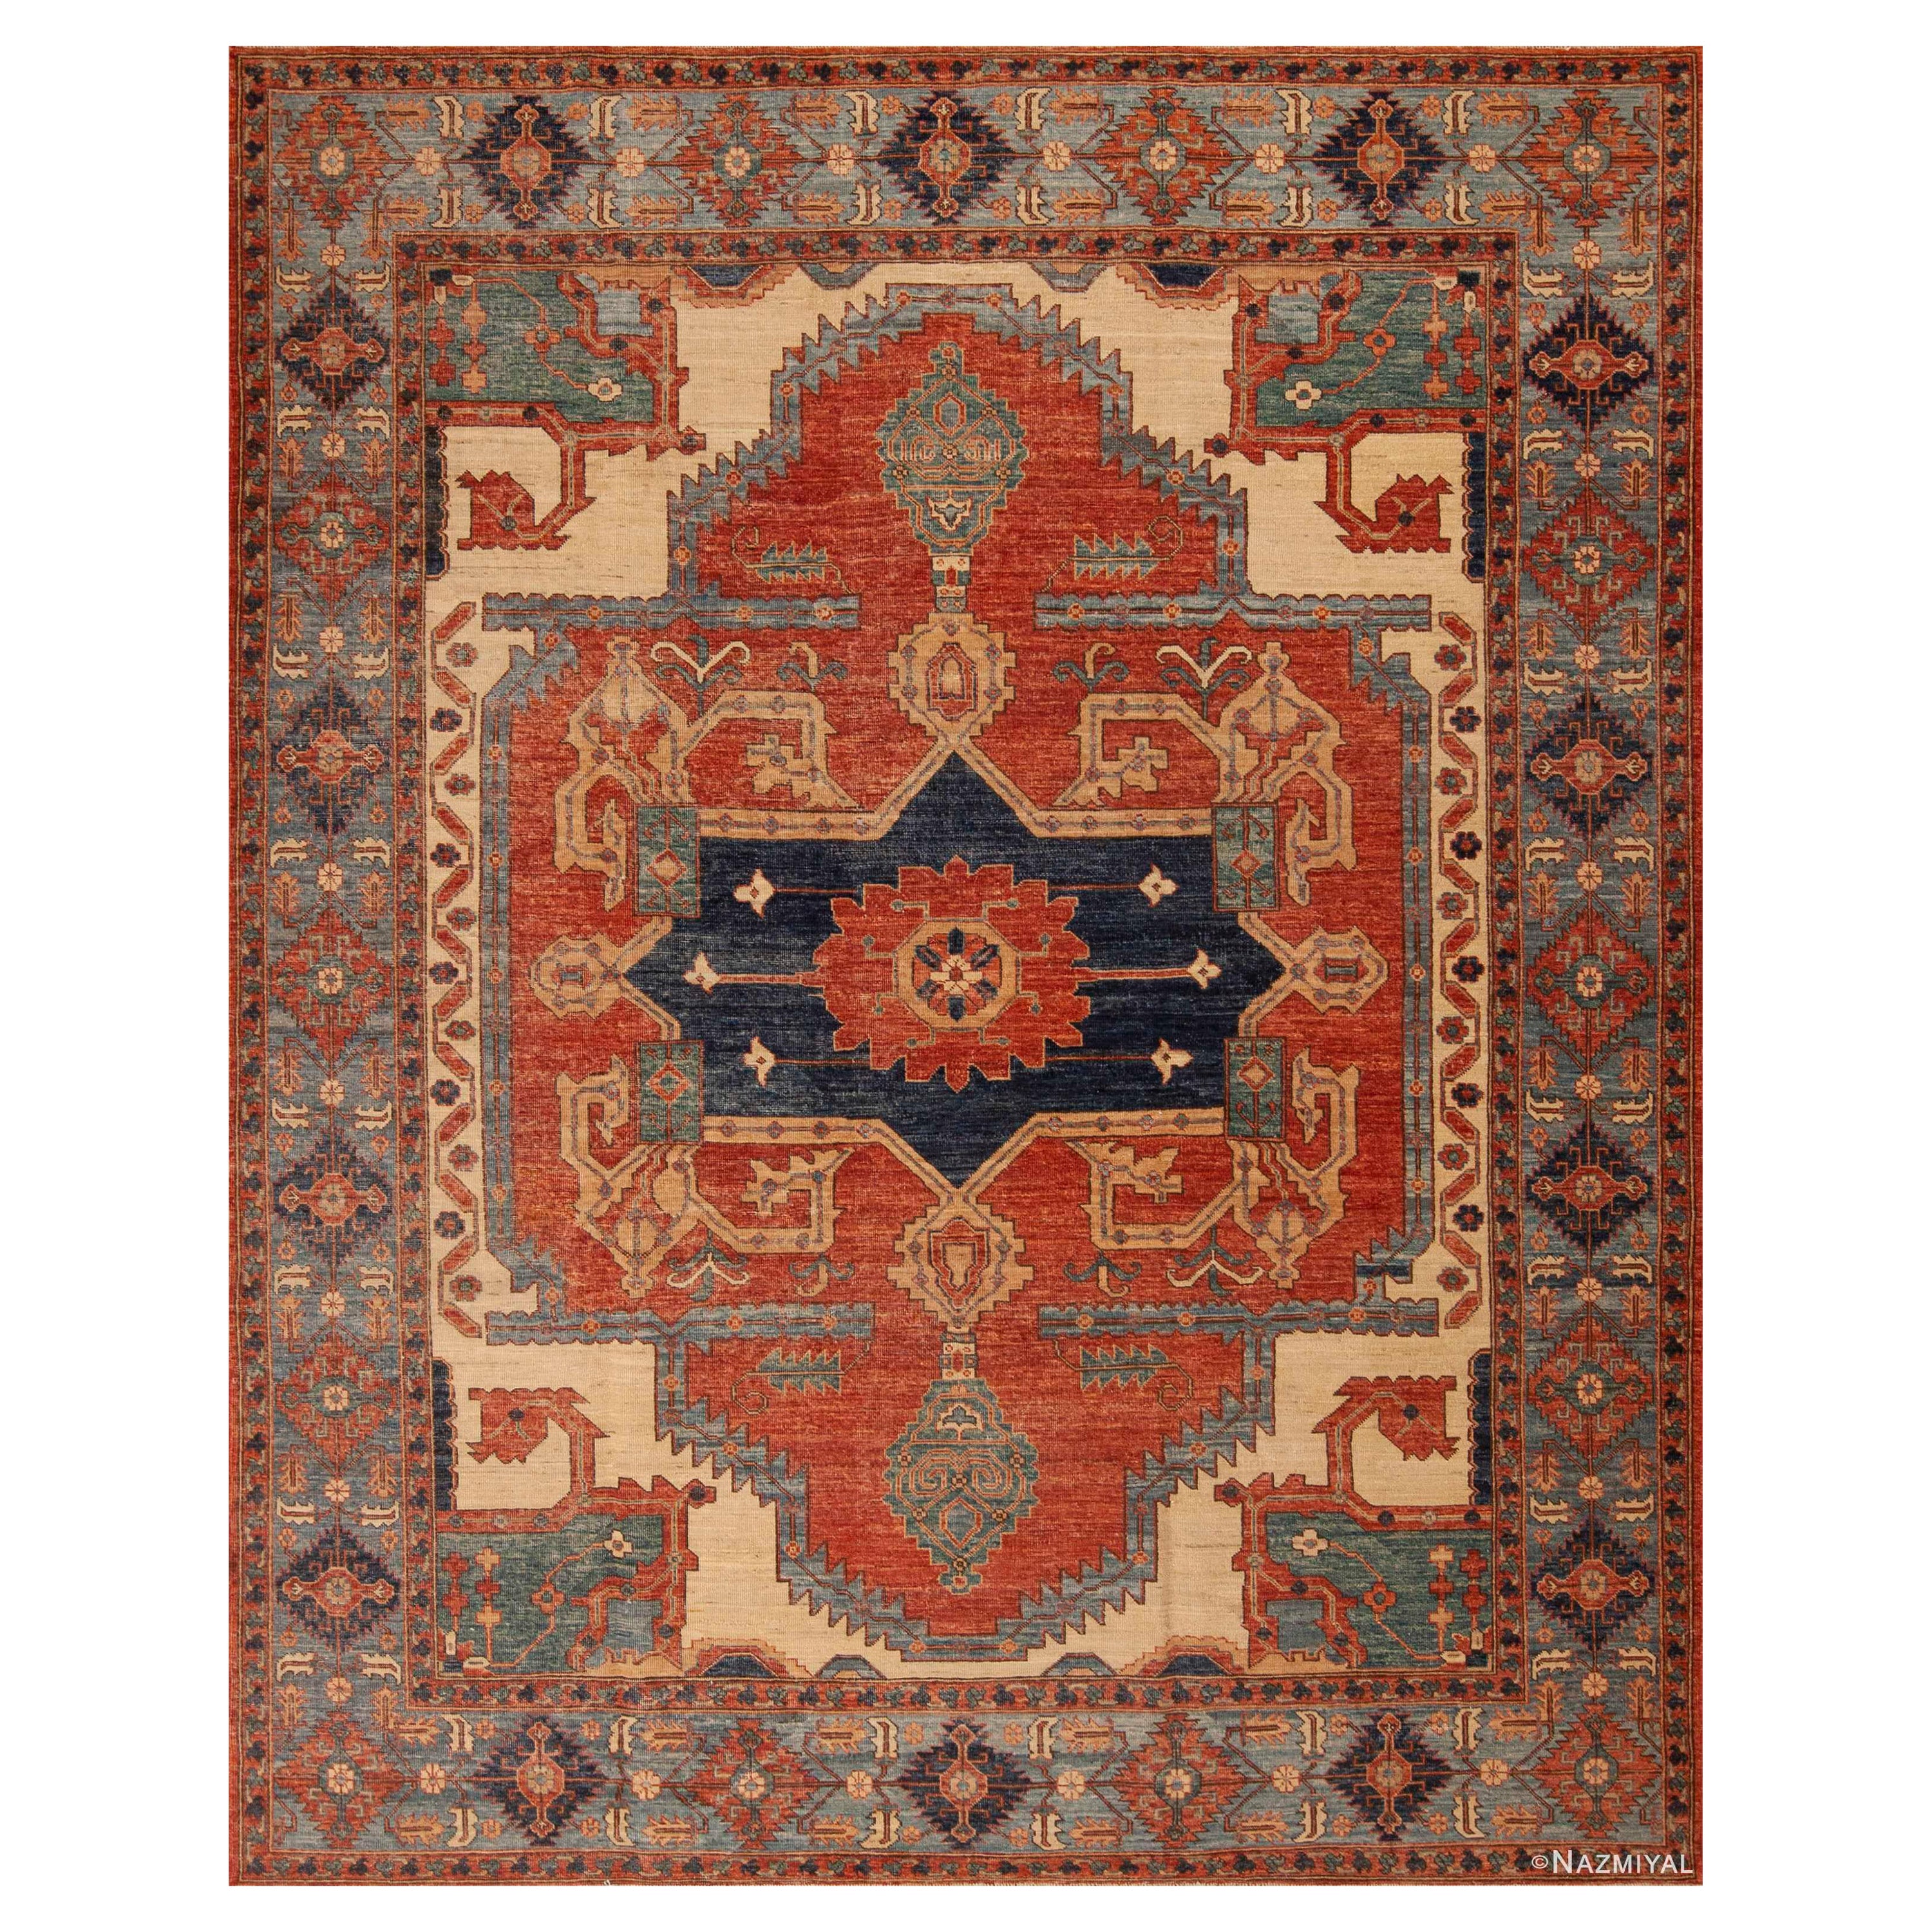 Nazmiyal Collection Rustic Tribal Persian Design Modern Area Rug 8'2" x 10'2" For Sale